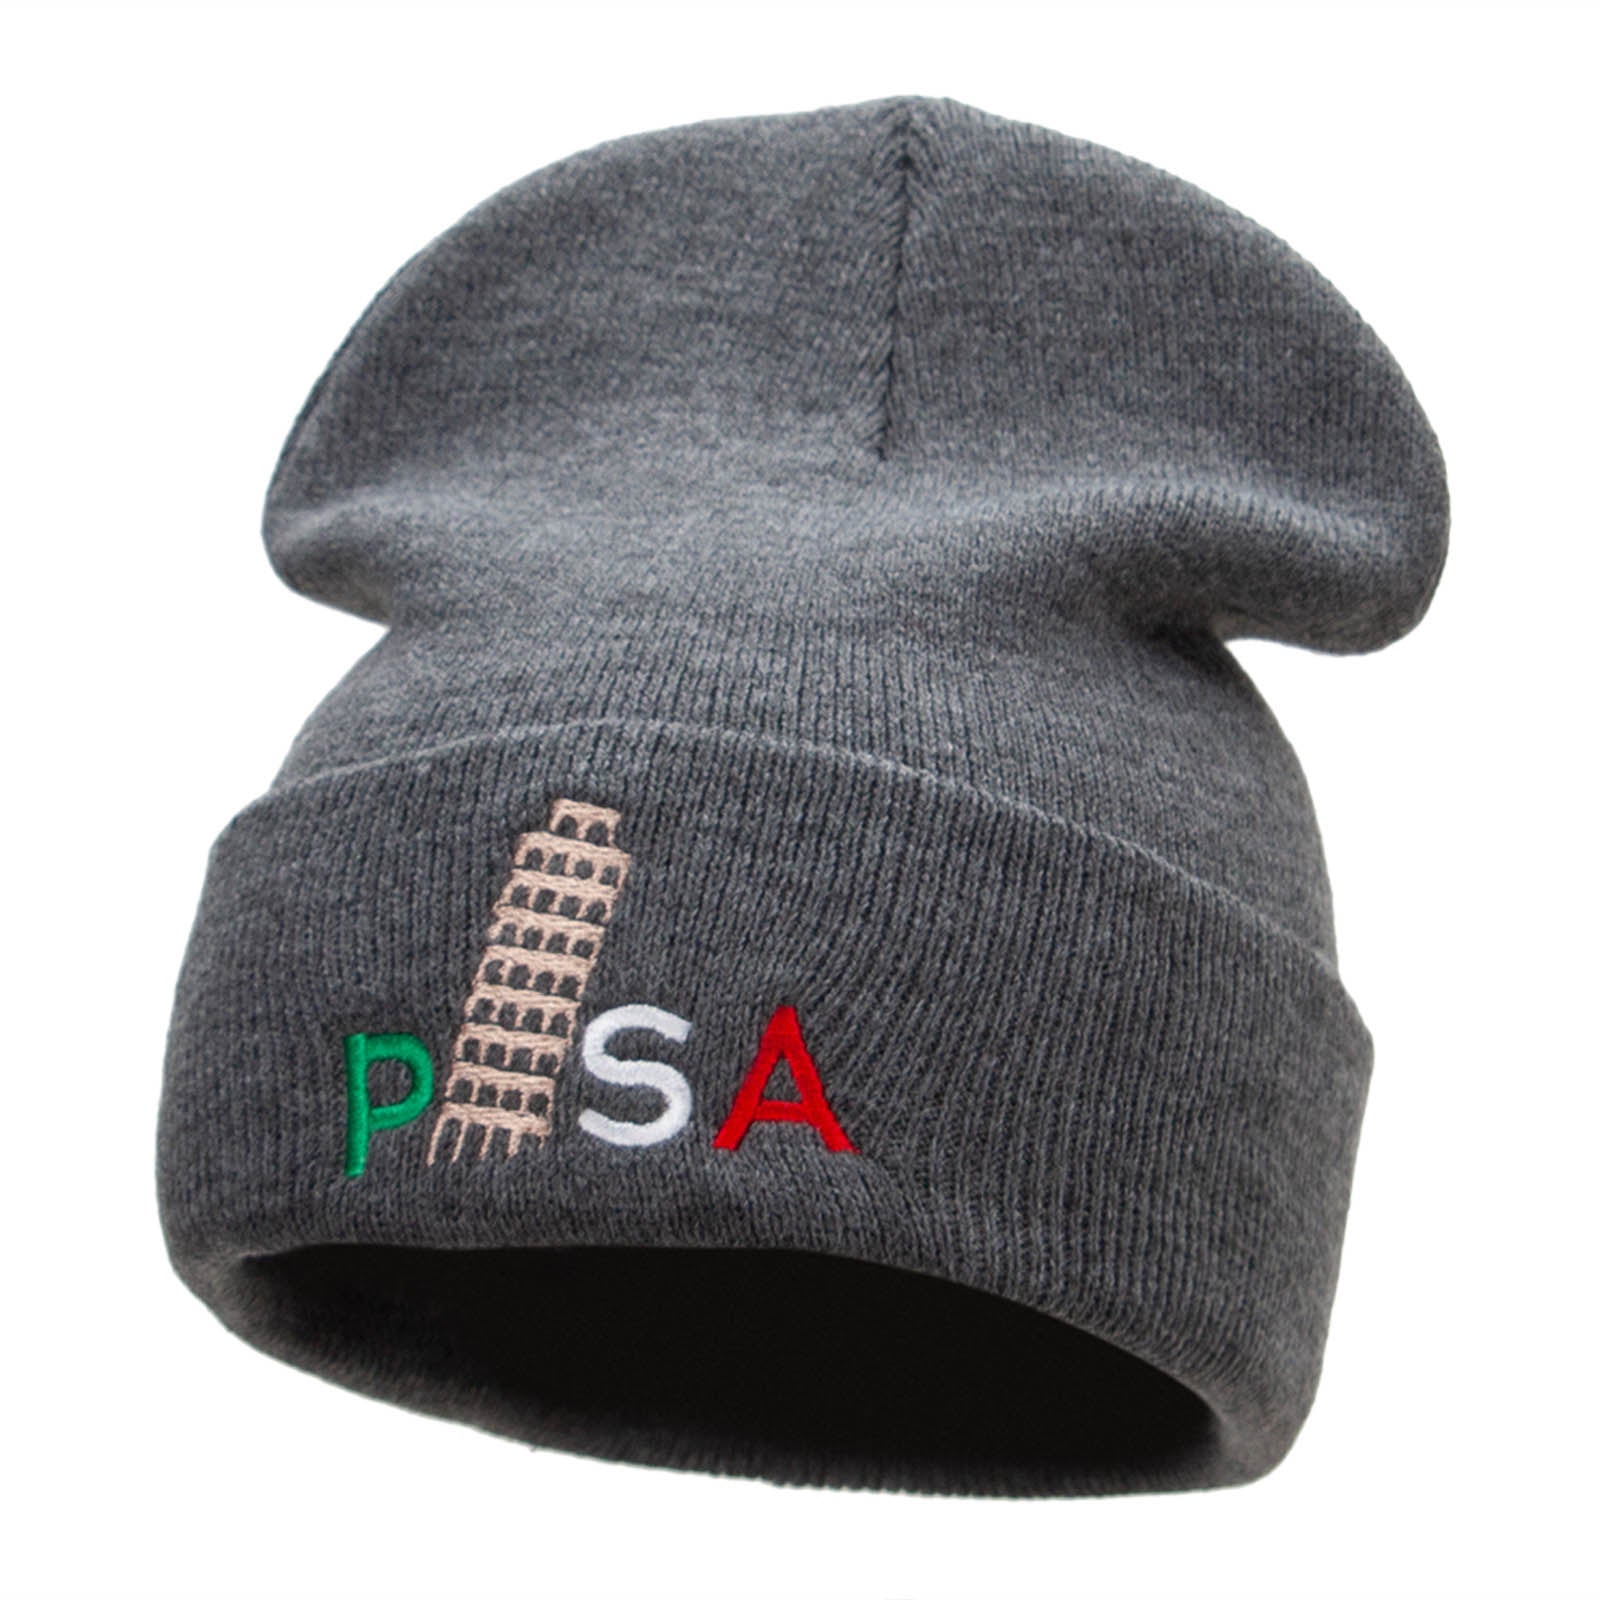 Pisa Embroidered 12 Inch Long Knitted Beanie - Dk Grey OSFM